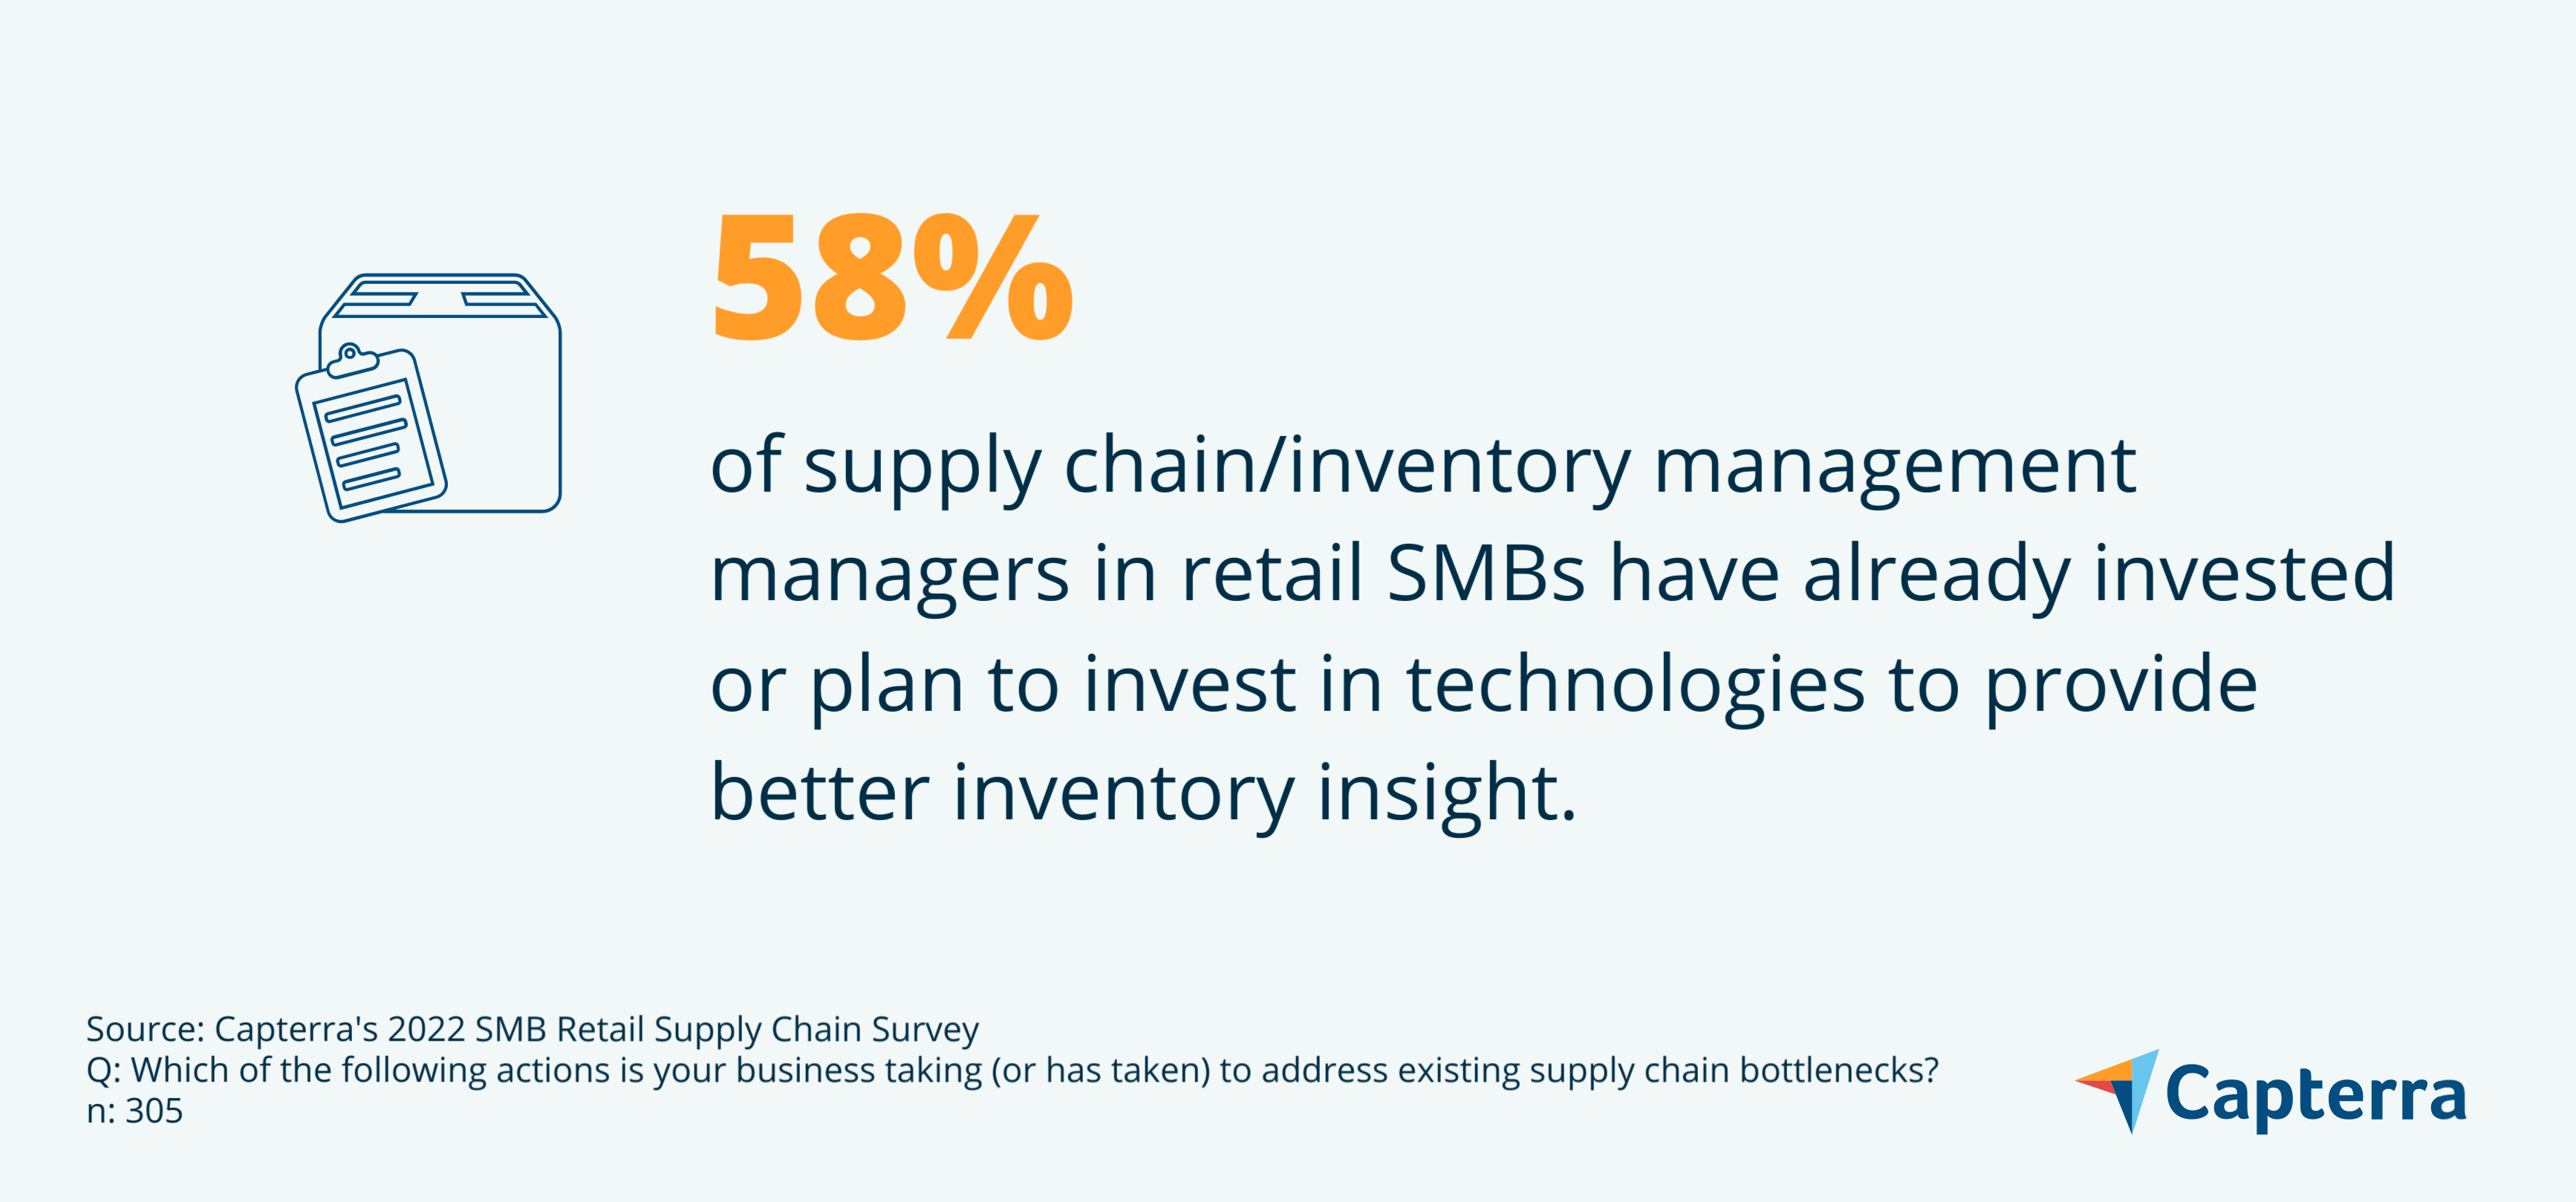 Infographic showing "Fifty-eight percent of supply chain/inventory management managers in retail SMBs have already invested or plan to invest in technologies to provide better inventory insight." for the blog article "What Is AI Analytics, and How Can It Do For My Business?"